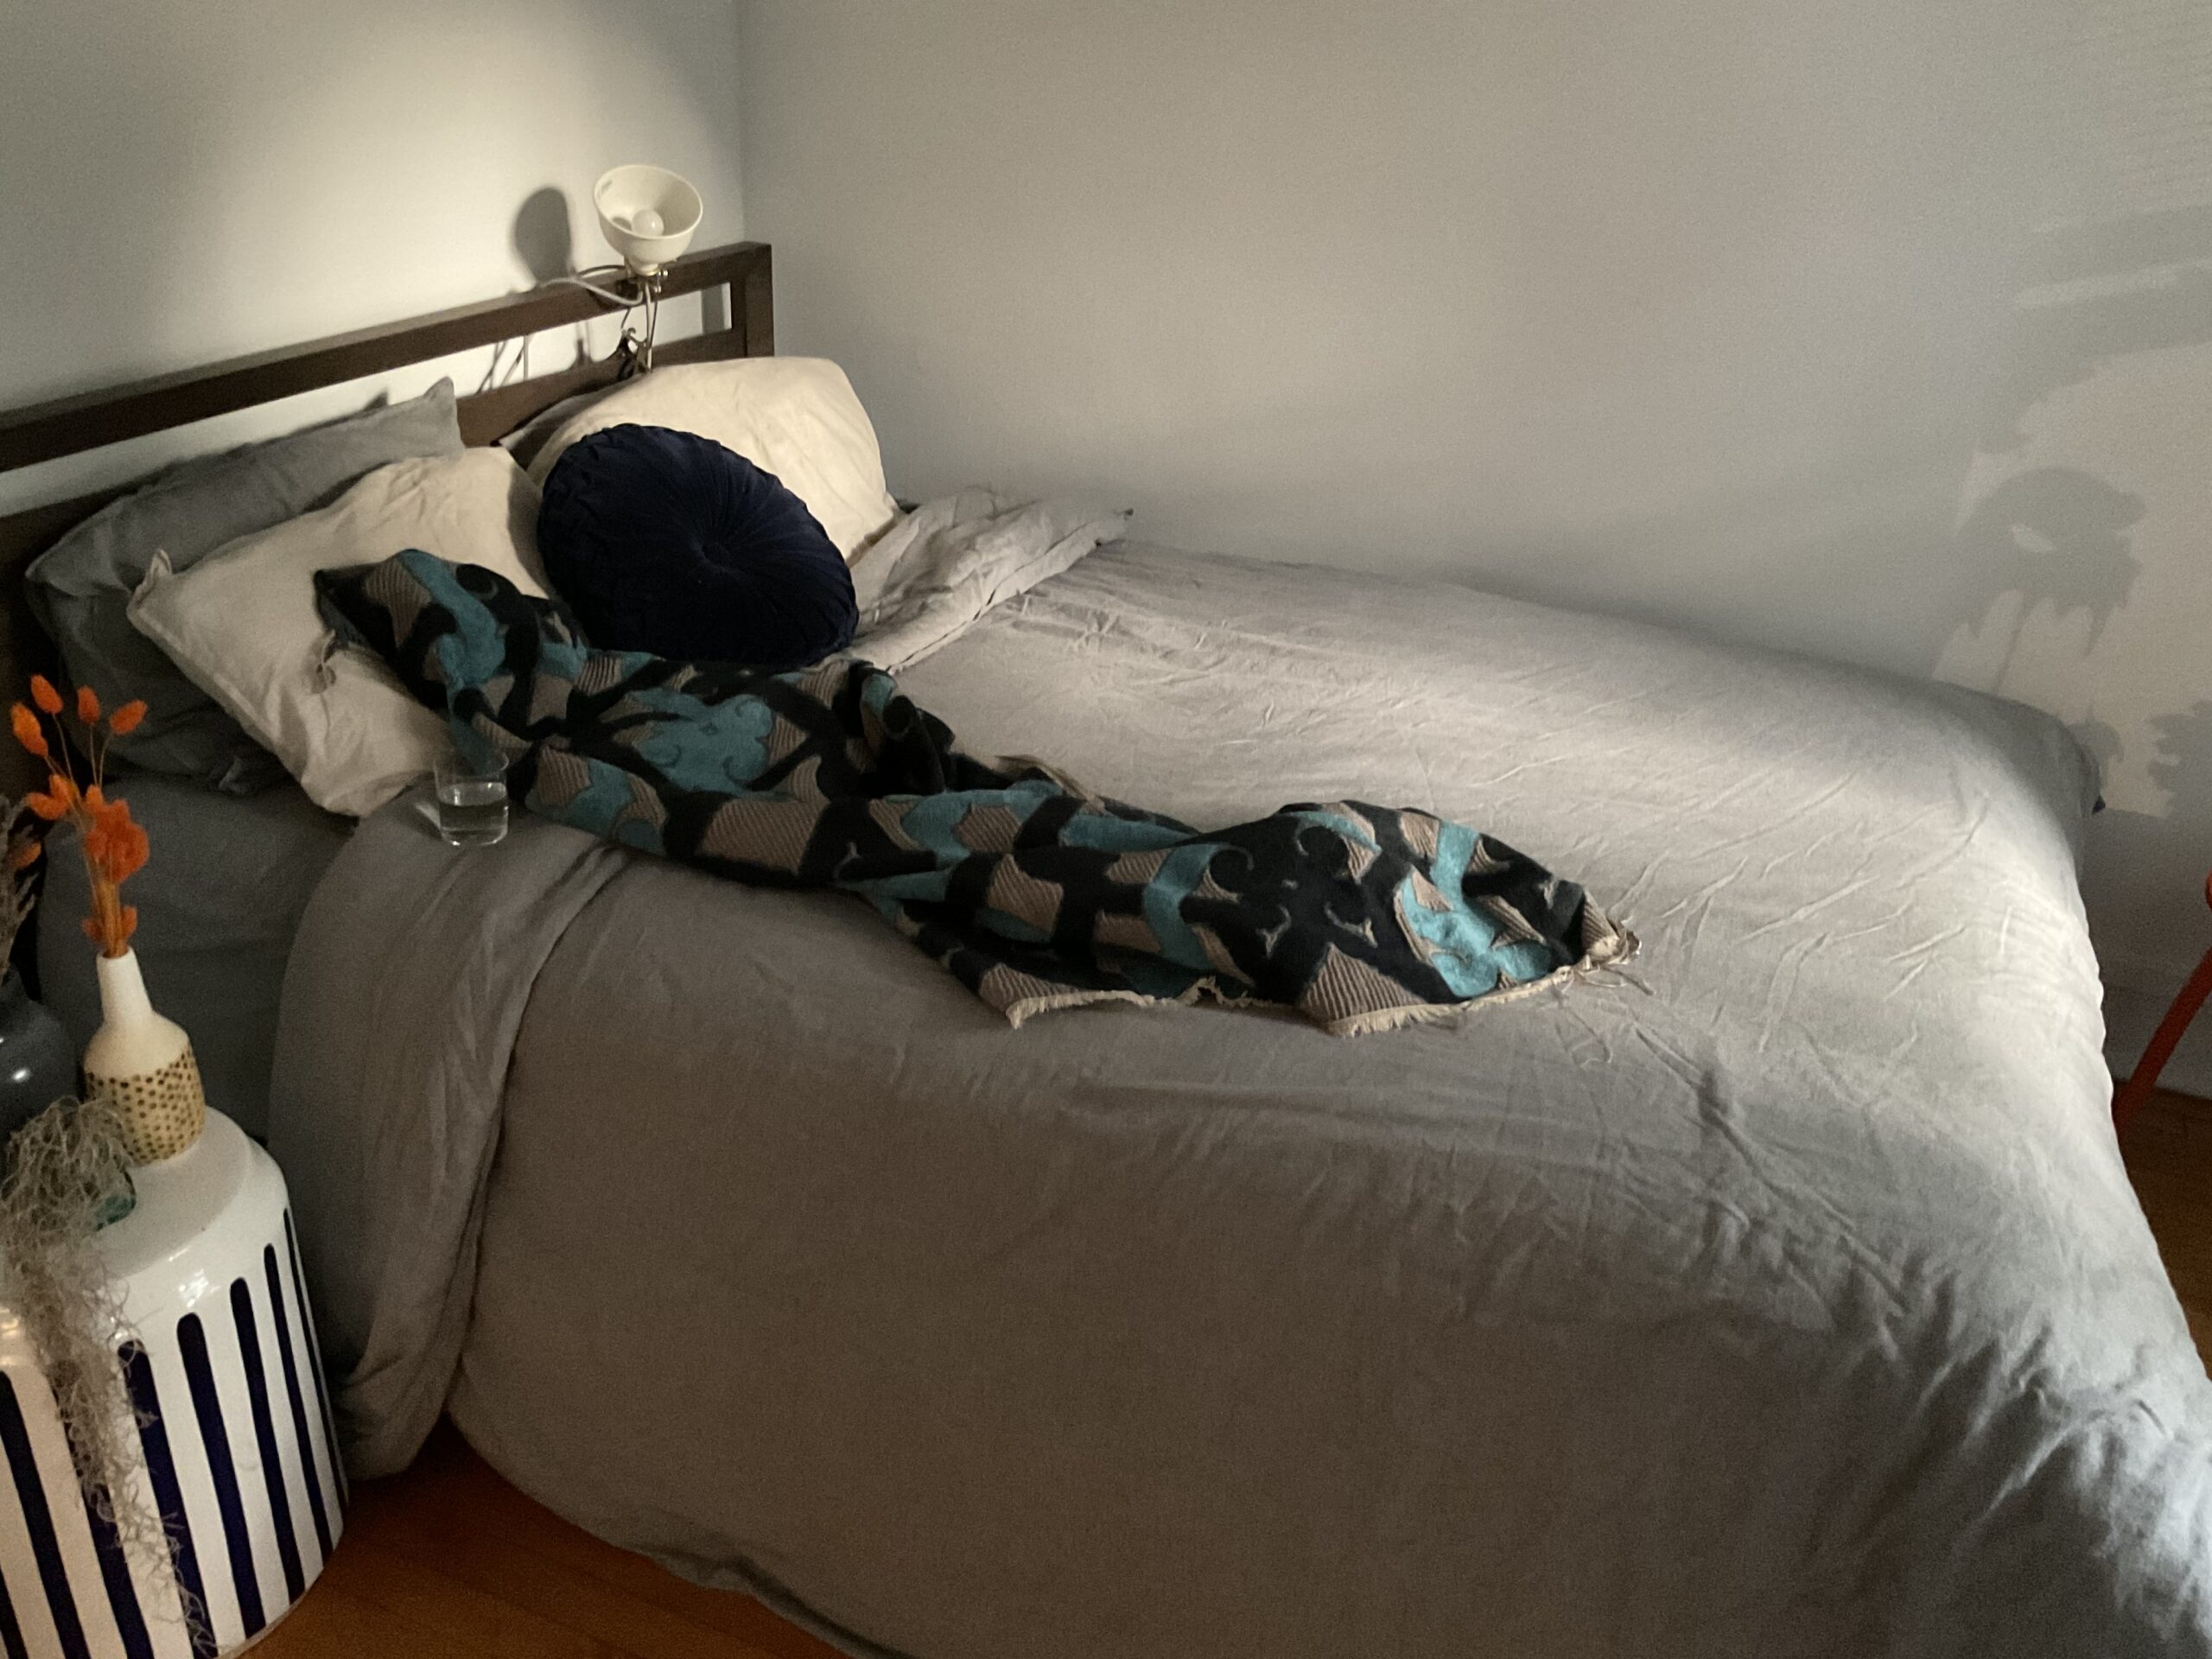 Blue patterned blanket lies on bed with gray bedspread with glass of water beside it.